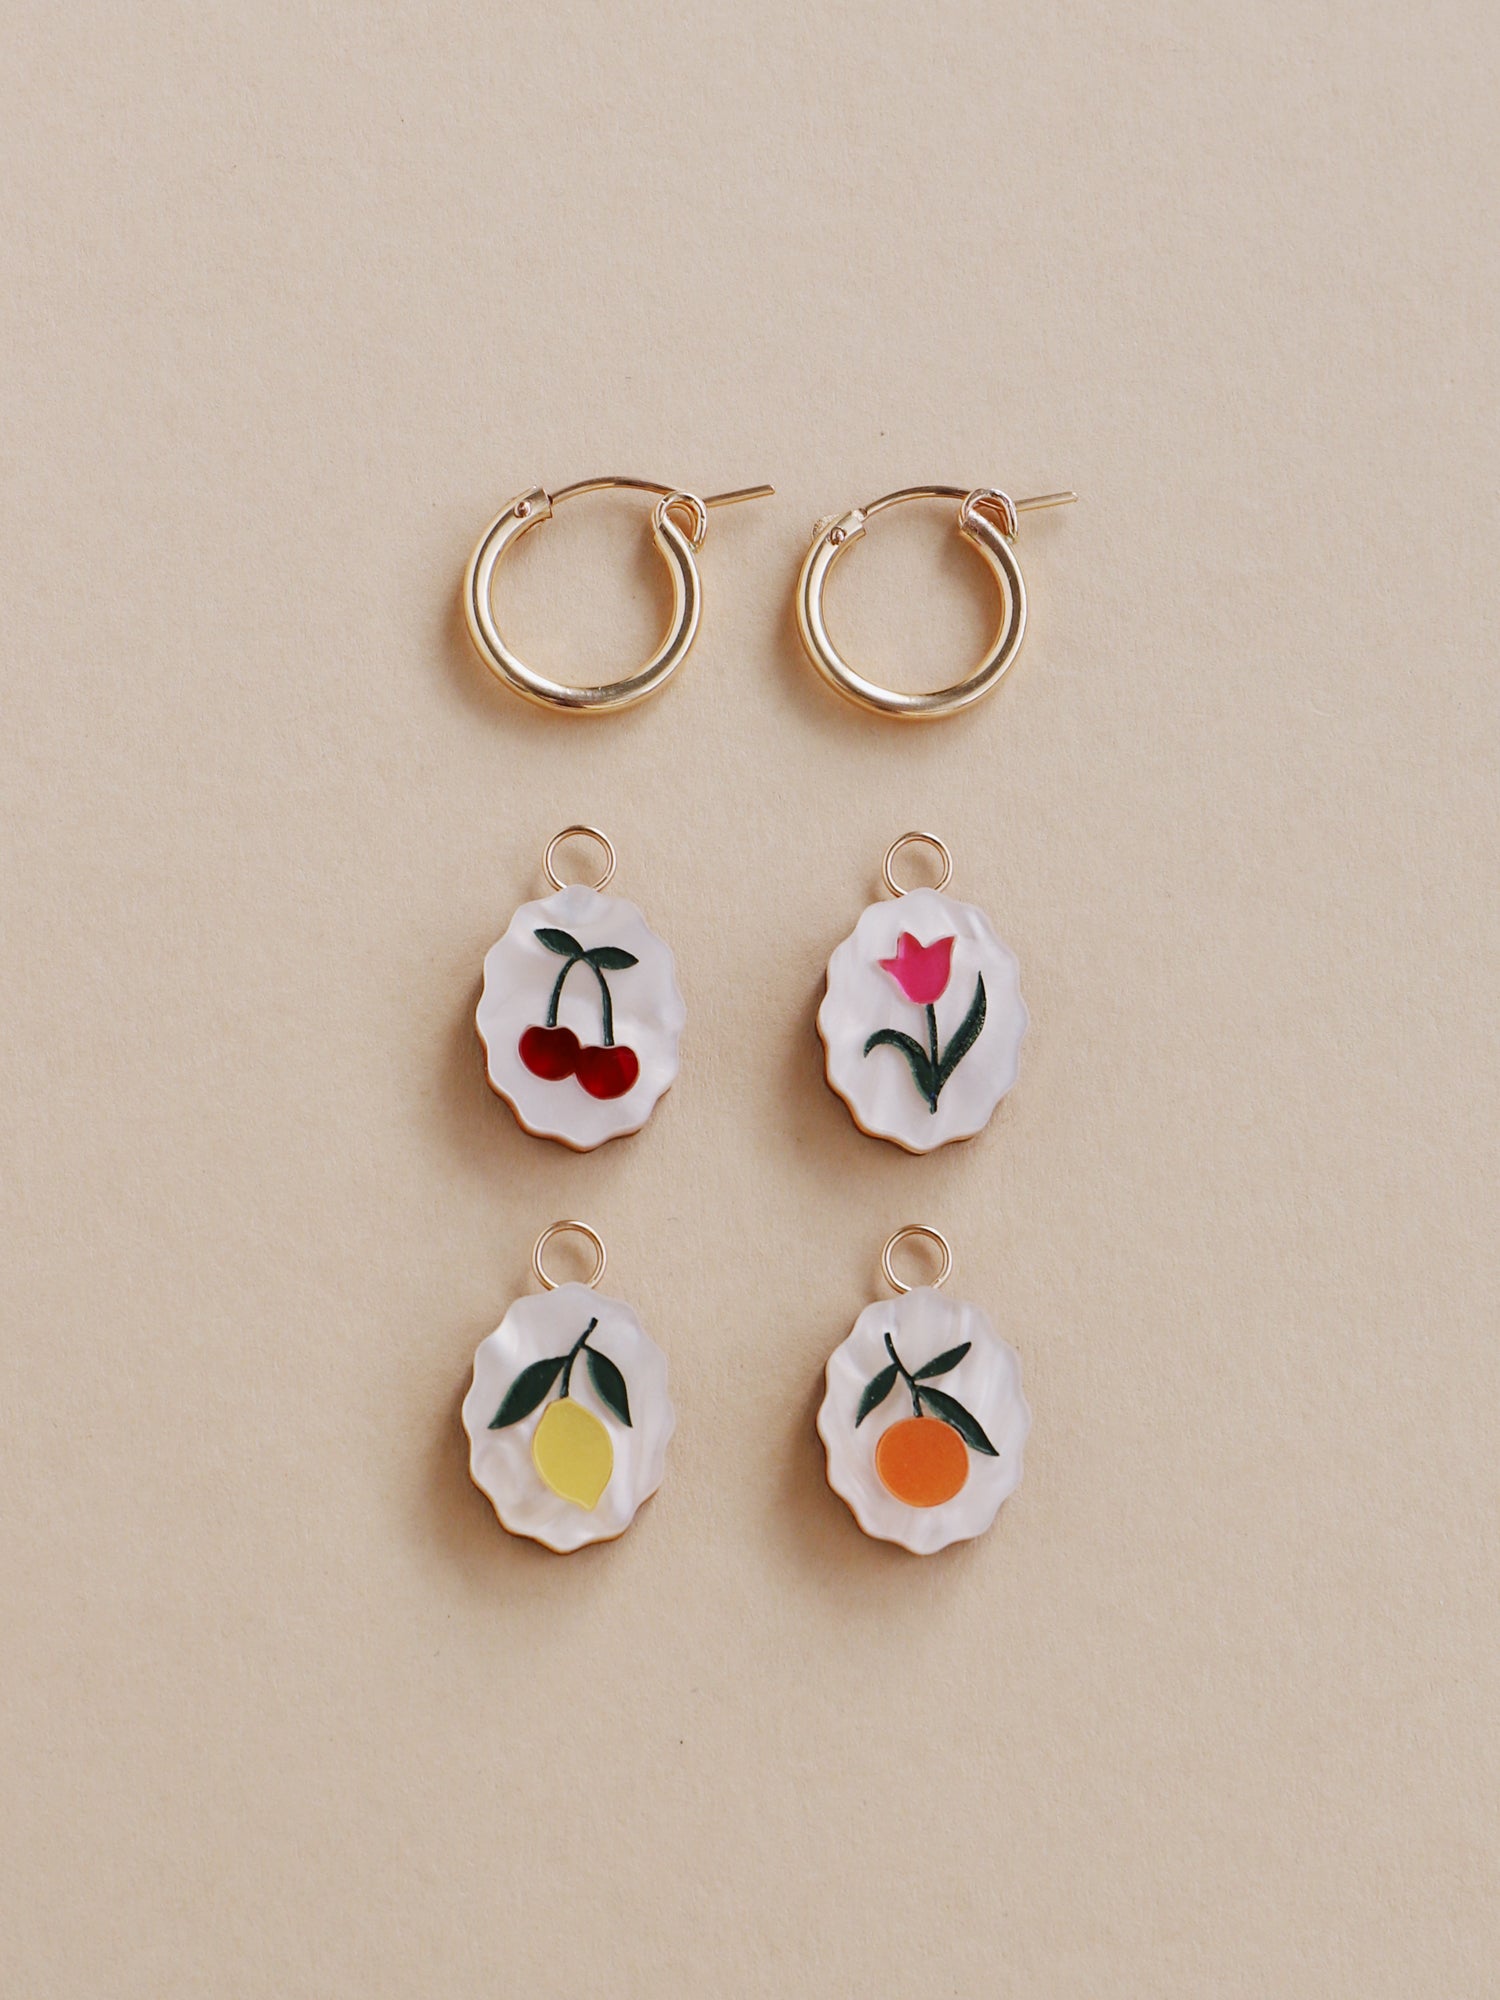 Lemon, cherry, tulip & orange mix n’ match charm hoop earrings. Made from acrylic and 14k gold-filled hoops & findings. Handmade in the UK by Wolf & Moon.